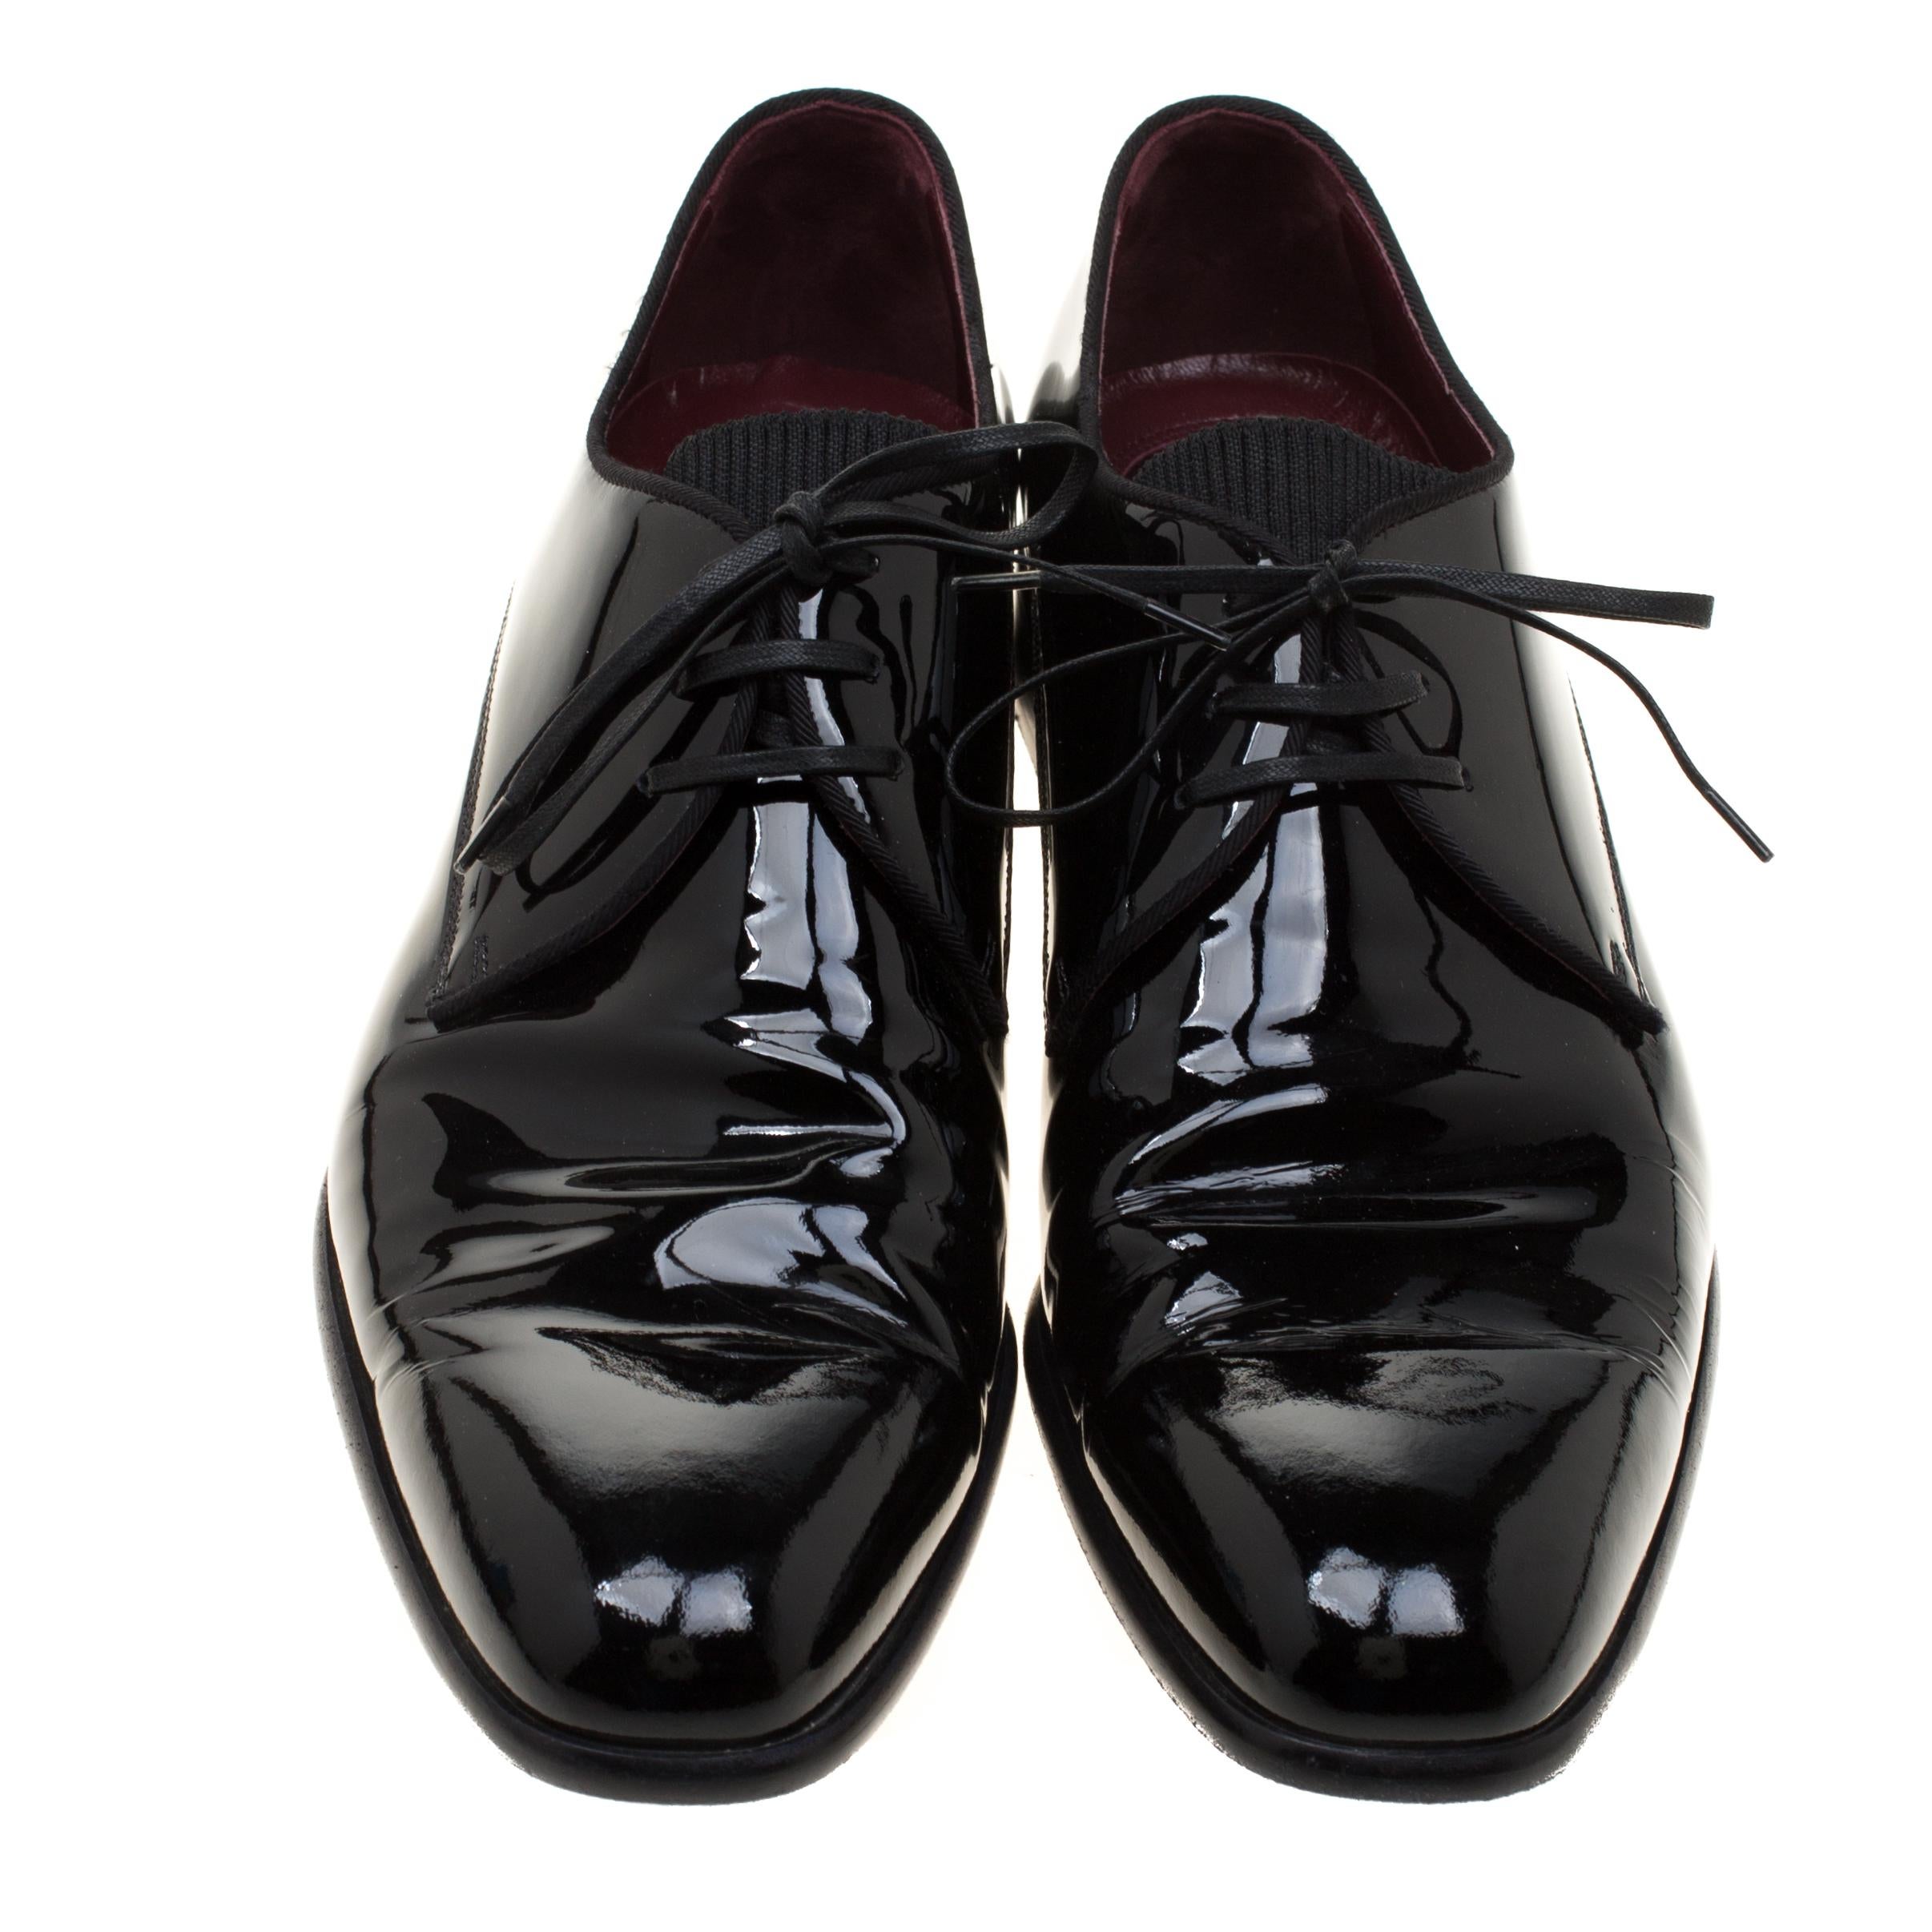 These Dolce and Gabbana shoes bring a refined look! The pair is expertly crafted from black patent leather and feature lace-ups on the vamps and comfortable insoles. Pair them with a plain shirt, slim fit trousers and a double-breasted blazer for a